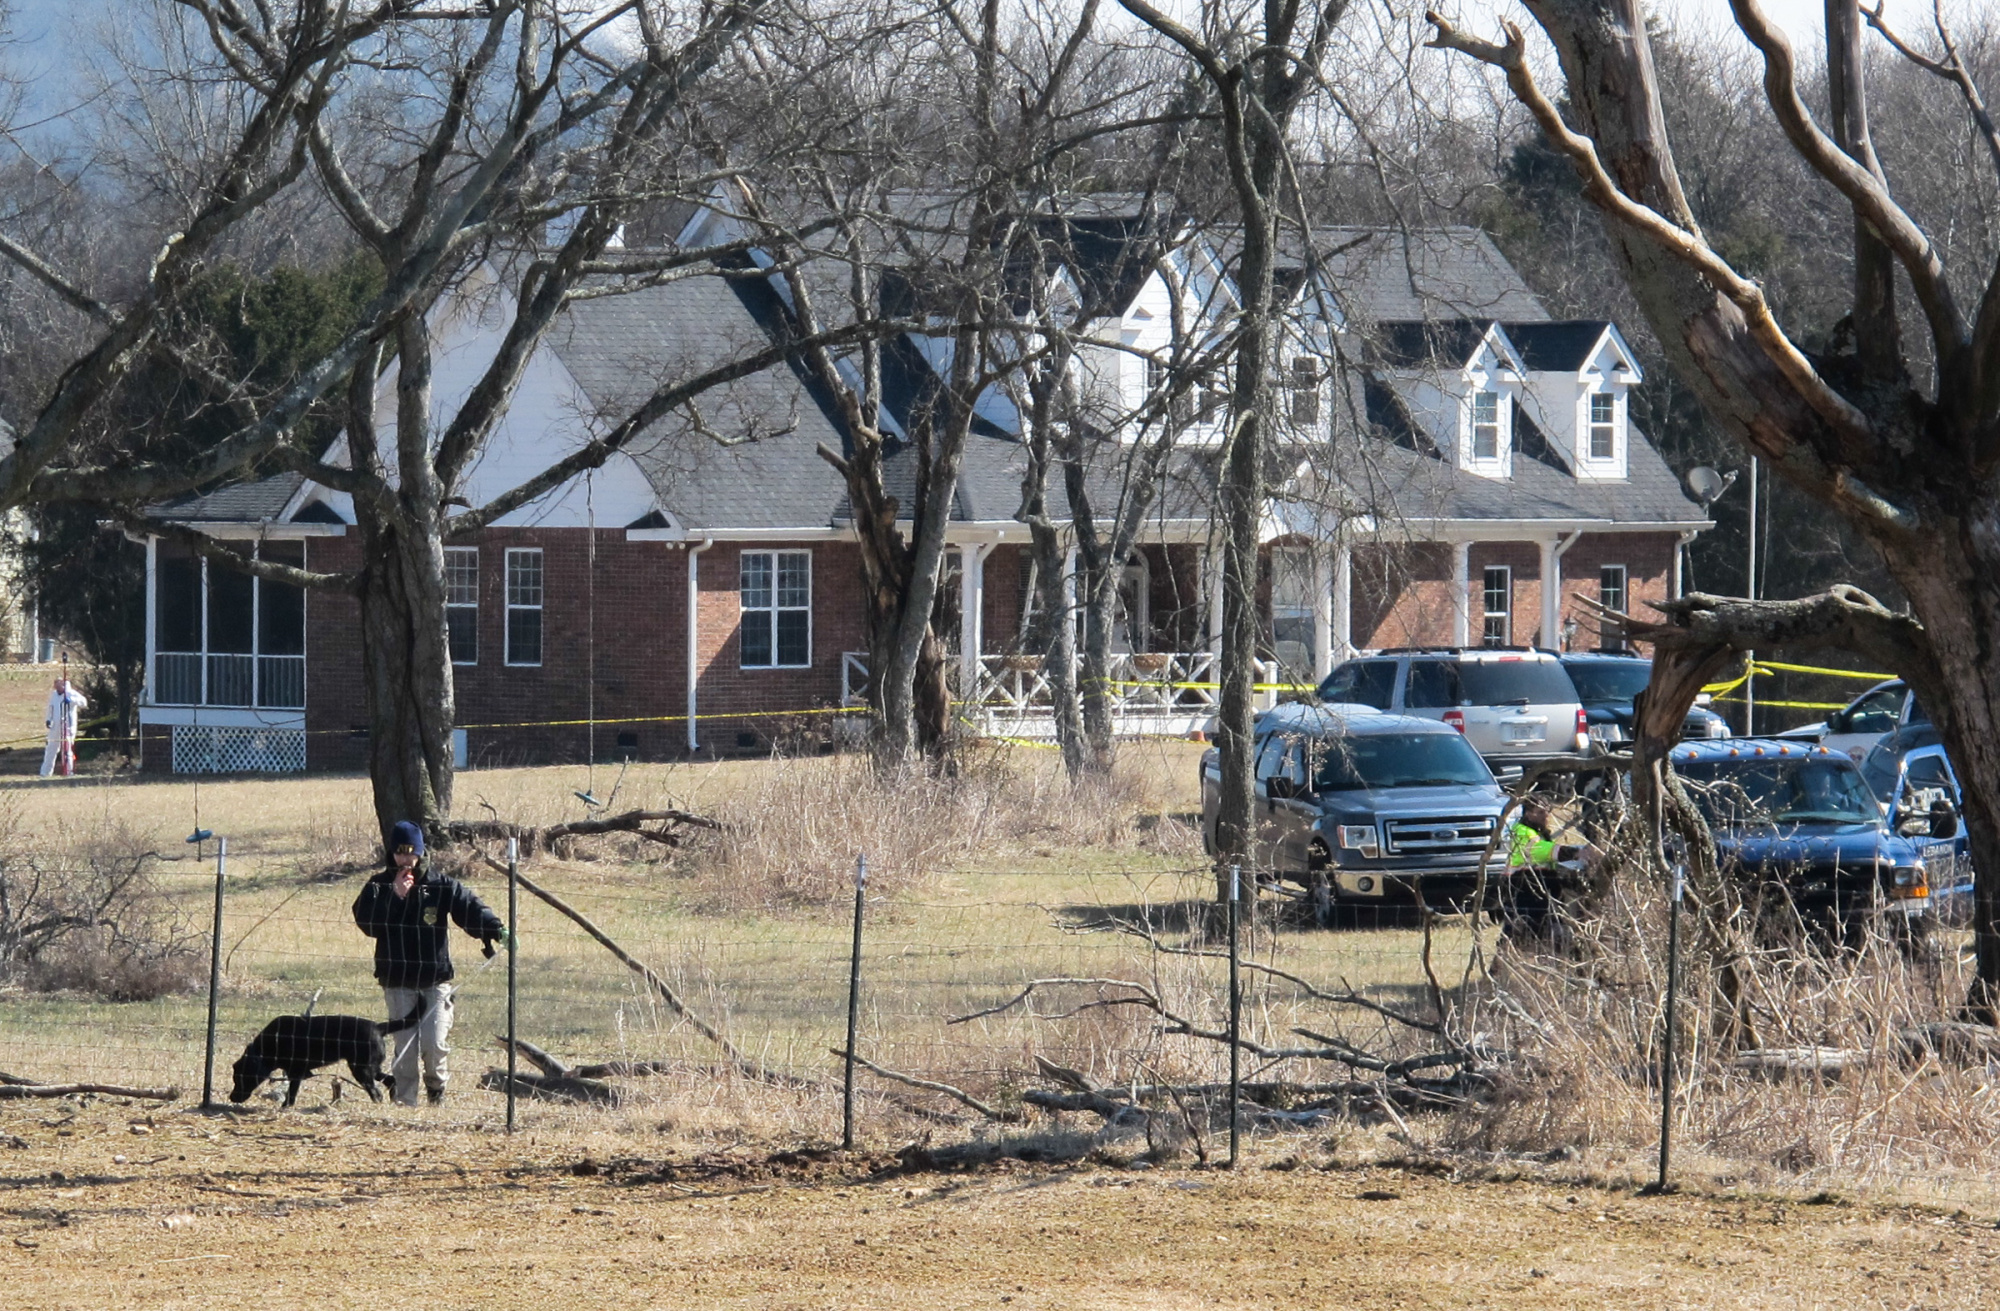 An officer and a dog inspect a fence near a home in Lebanon, Tenn., on Tuesday, Feb. 11, 2014, where police said a package exploded, killing a 74-year-old man and his wife.